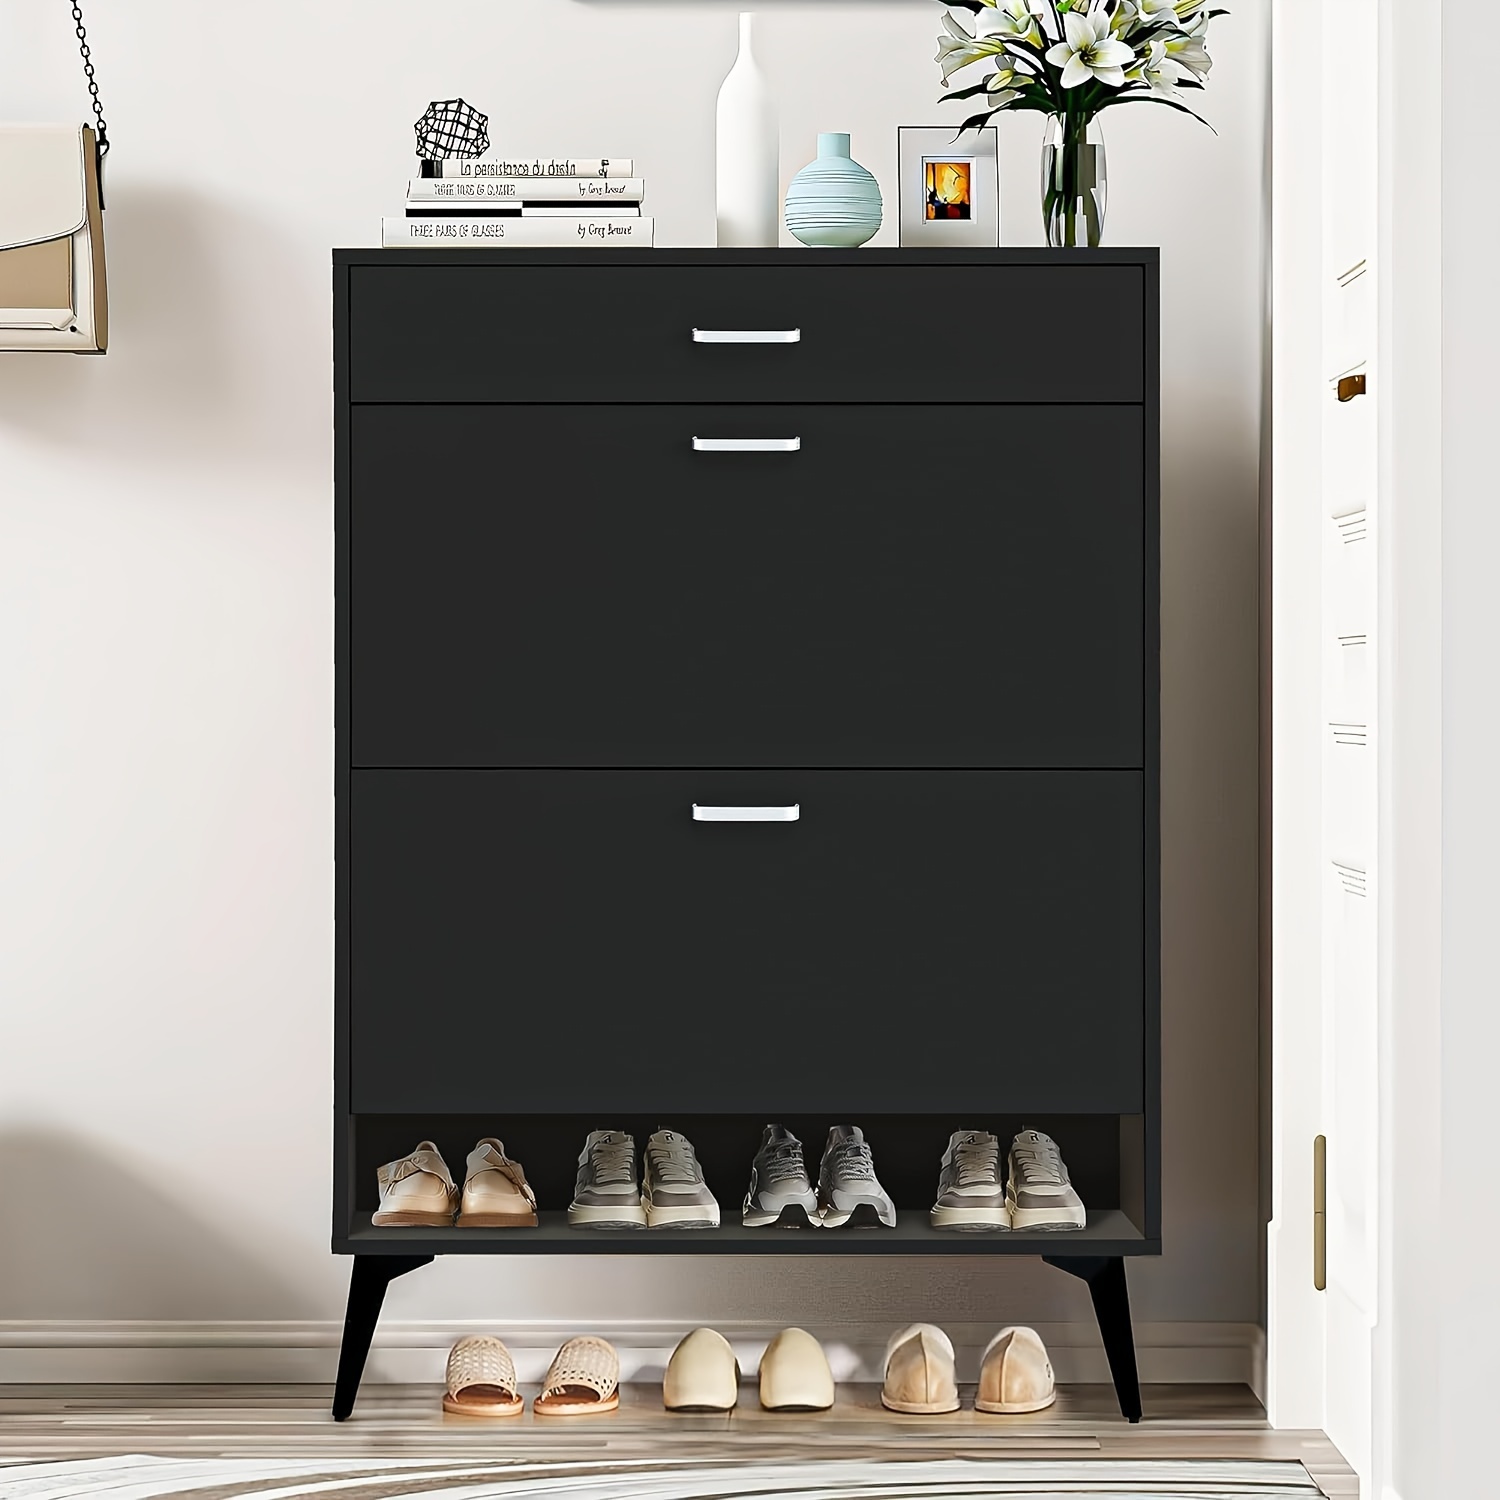 

Entrance Shoe Cabinet With 2 Flipped Deep Drawers, 1 Storage Drawer, And An Ultra-thin Hidden Shoe Cabinet With A Bottom Cube. Shoe Rack Cabinet With Metal Brackets And Adjustable Entrance Shelves